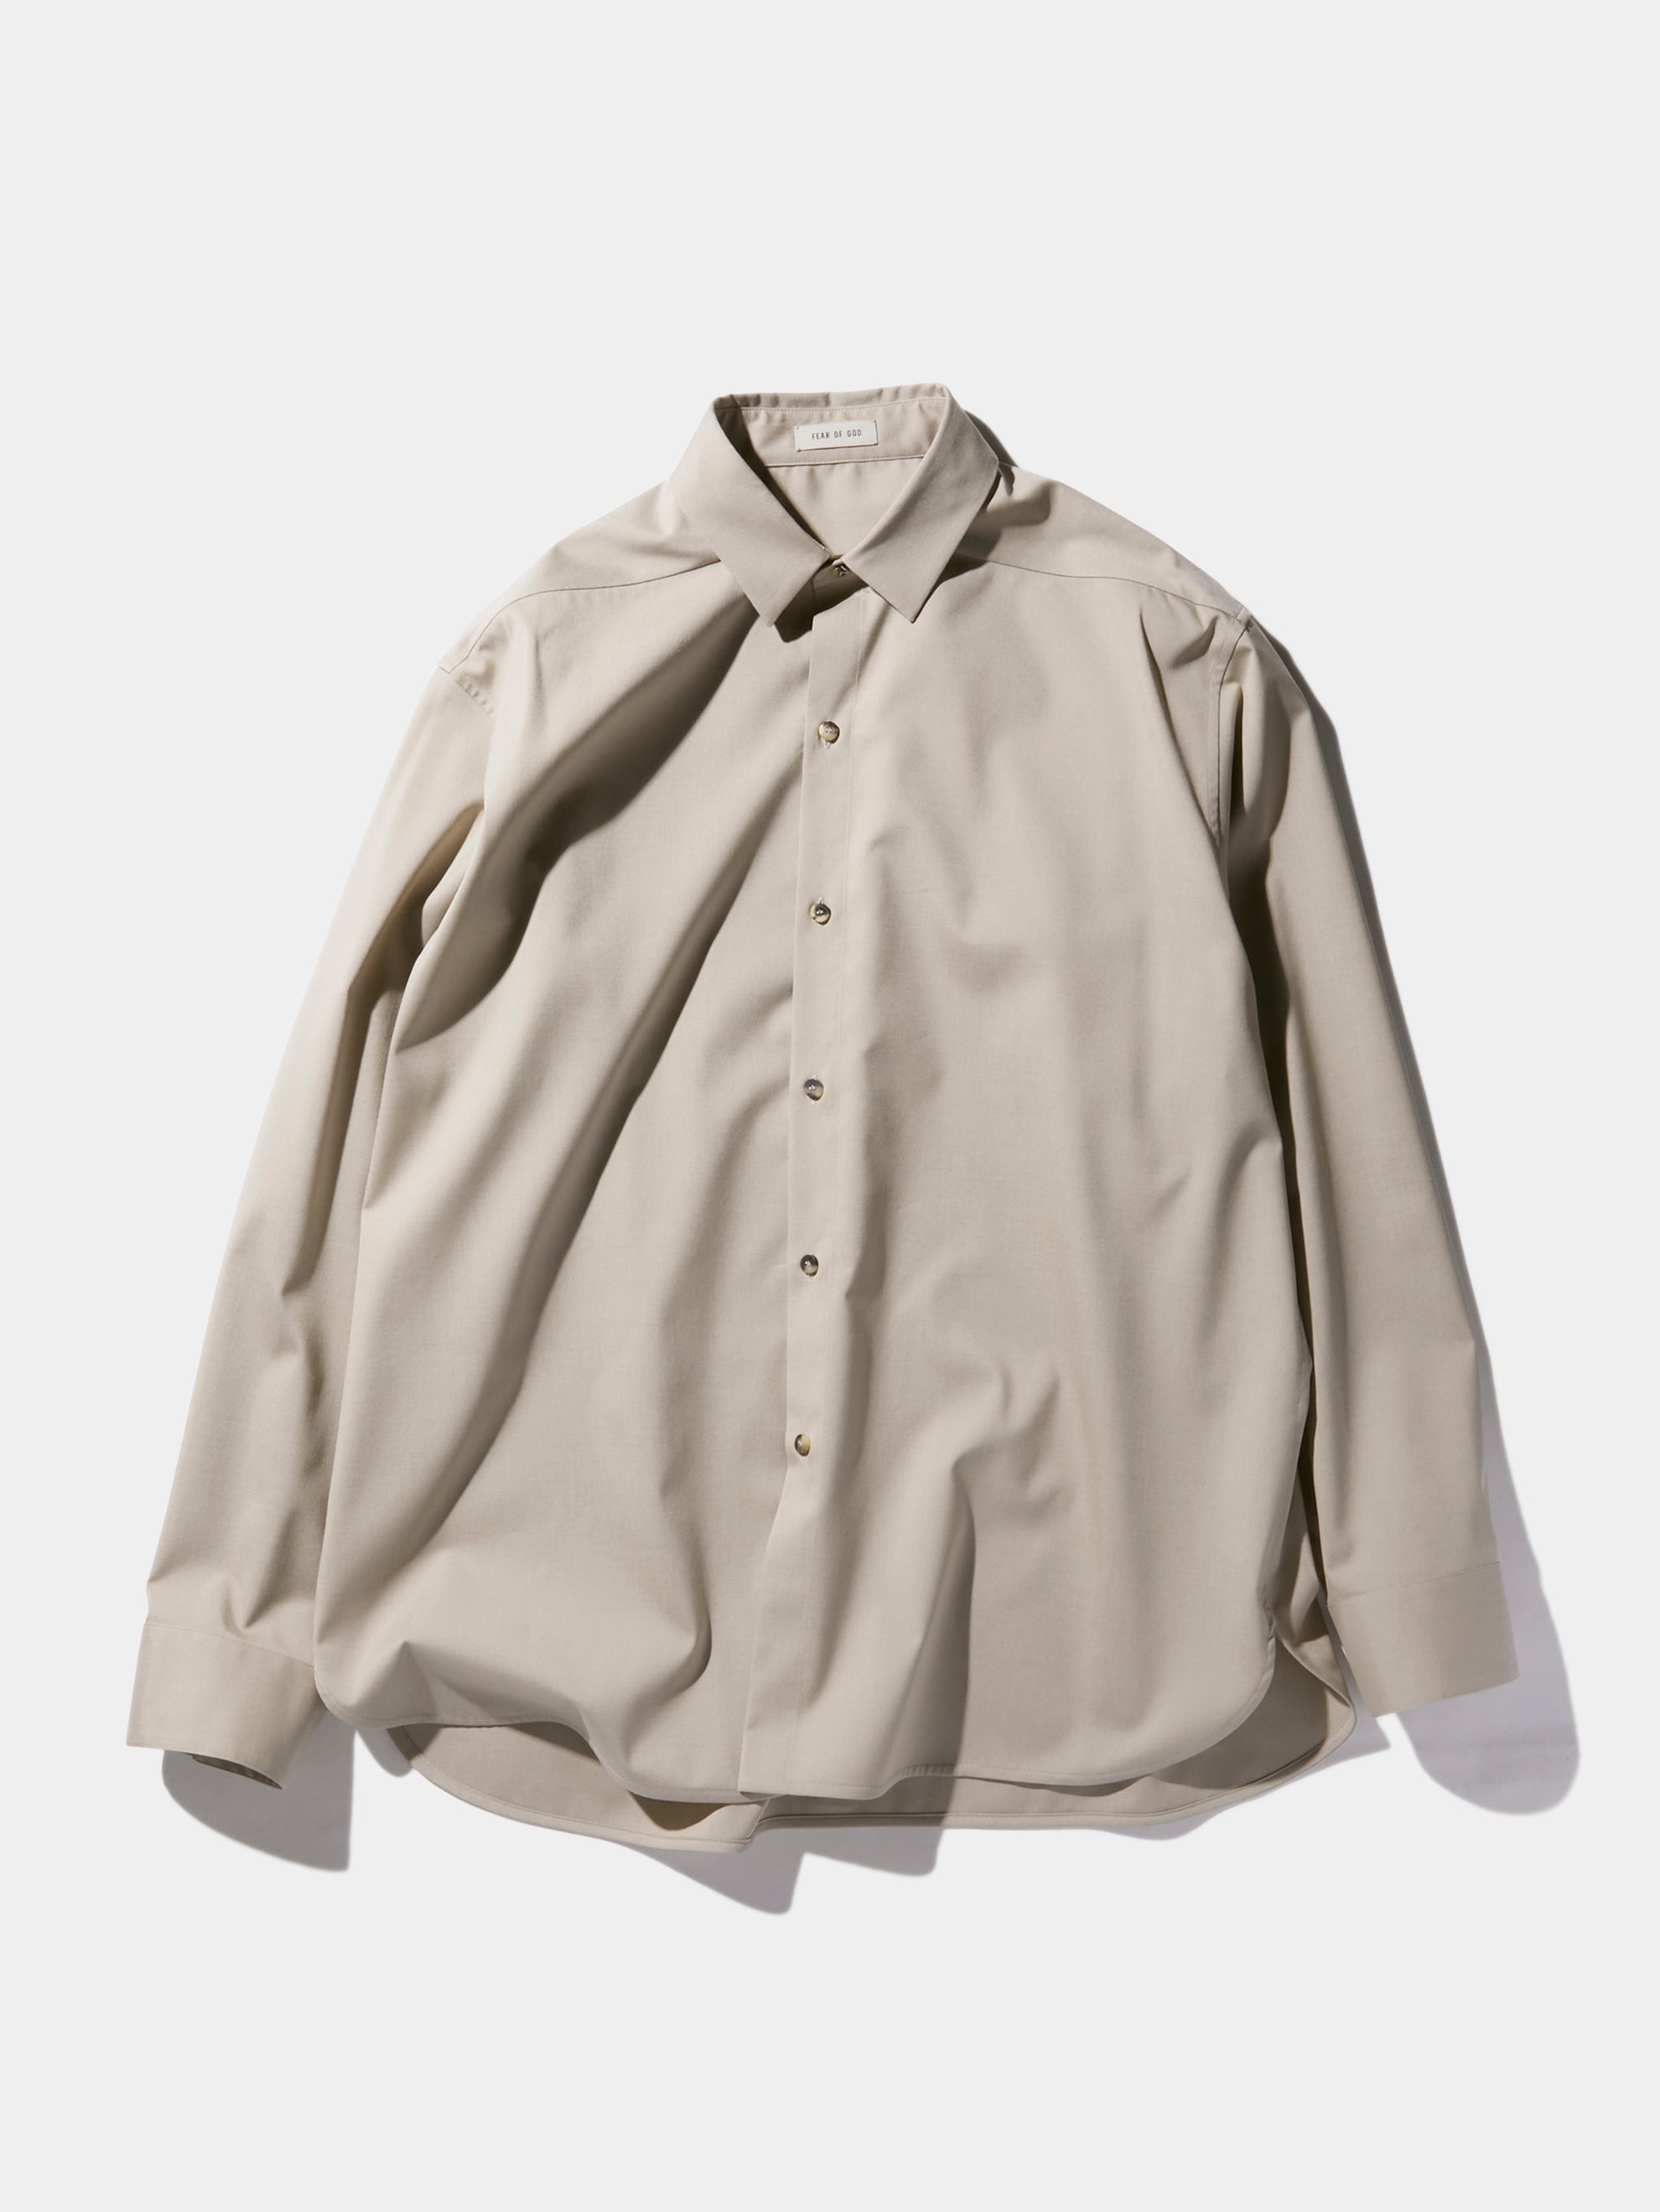 Buy Fear of God Eternal Button Front Shirt Online at UNION LOS ANGELES